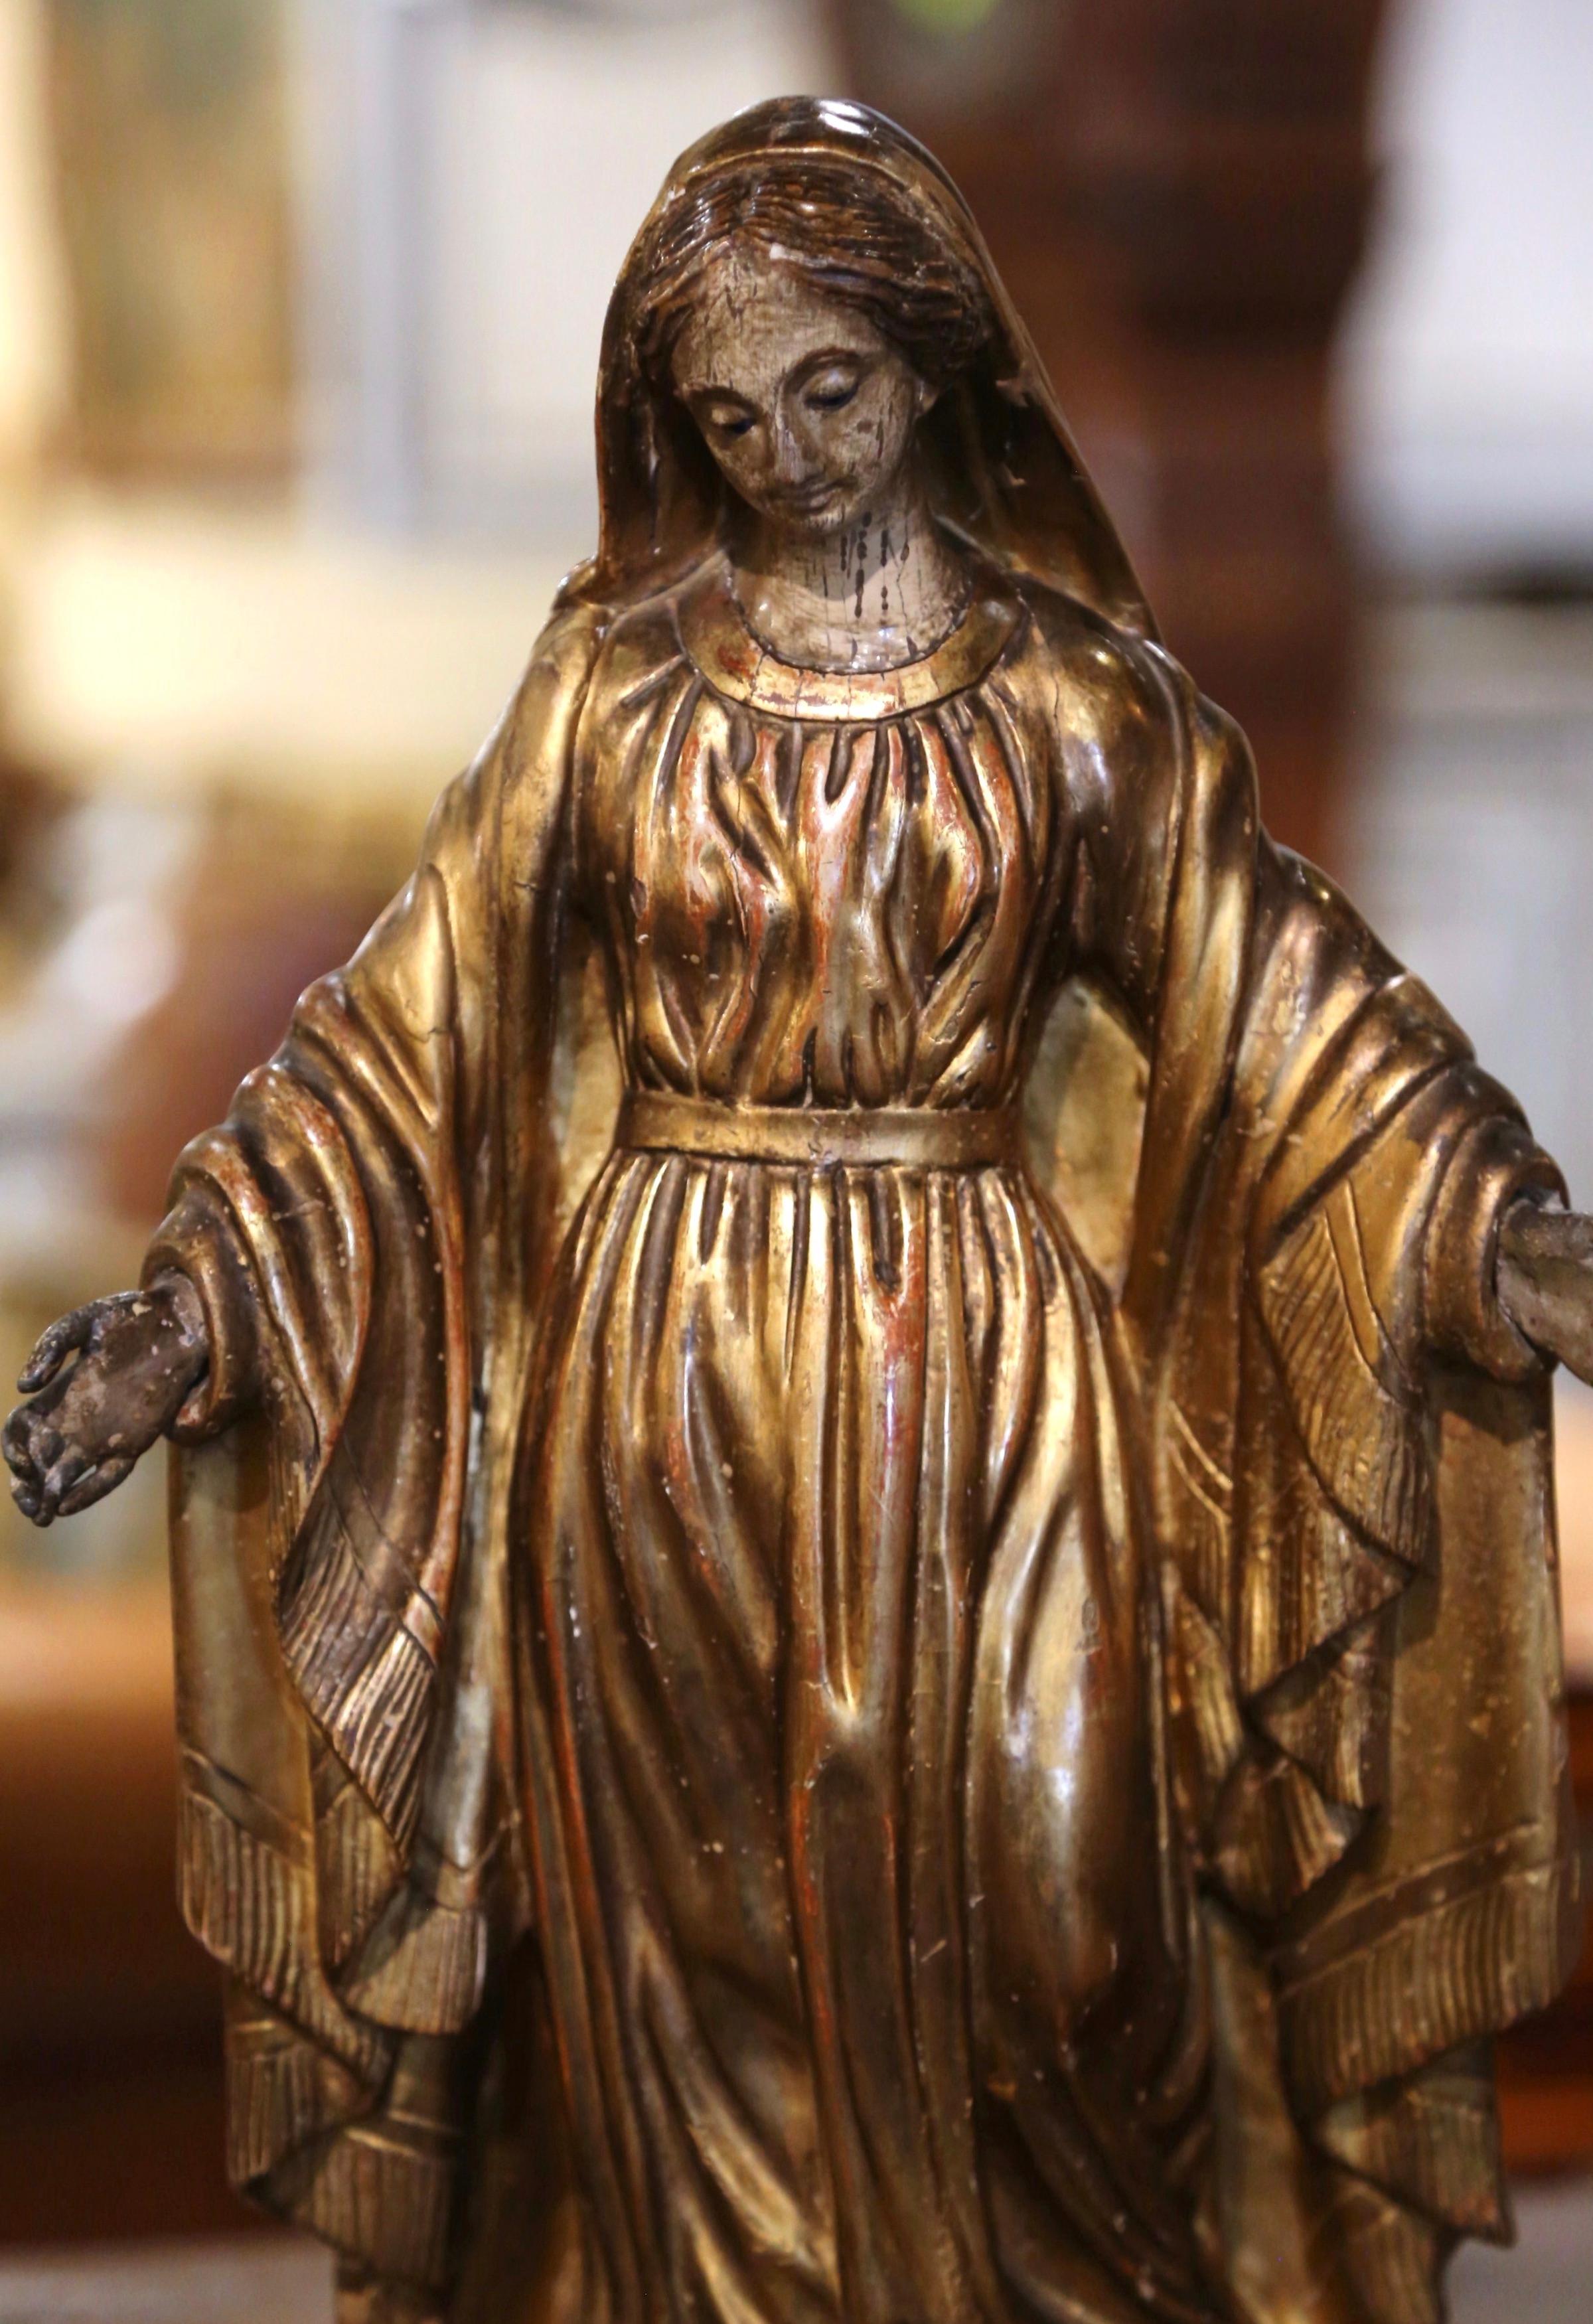 This beautiful, antique sculpture of the Virgin Mary in prayers was created in Provence, France, circa 1780. Embellished with gold leaf and polychrome finish, the classic religious figure is beautifully ornate and has wonderful details throughout